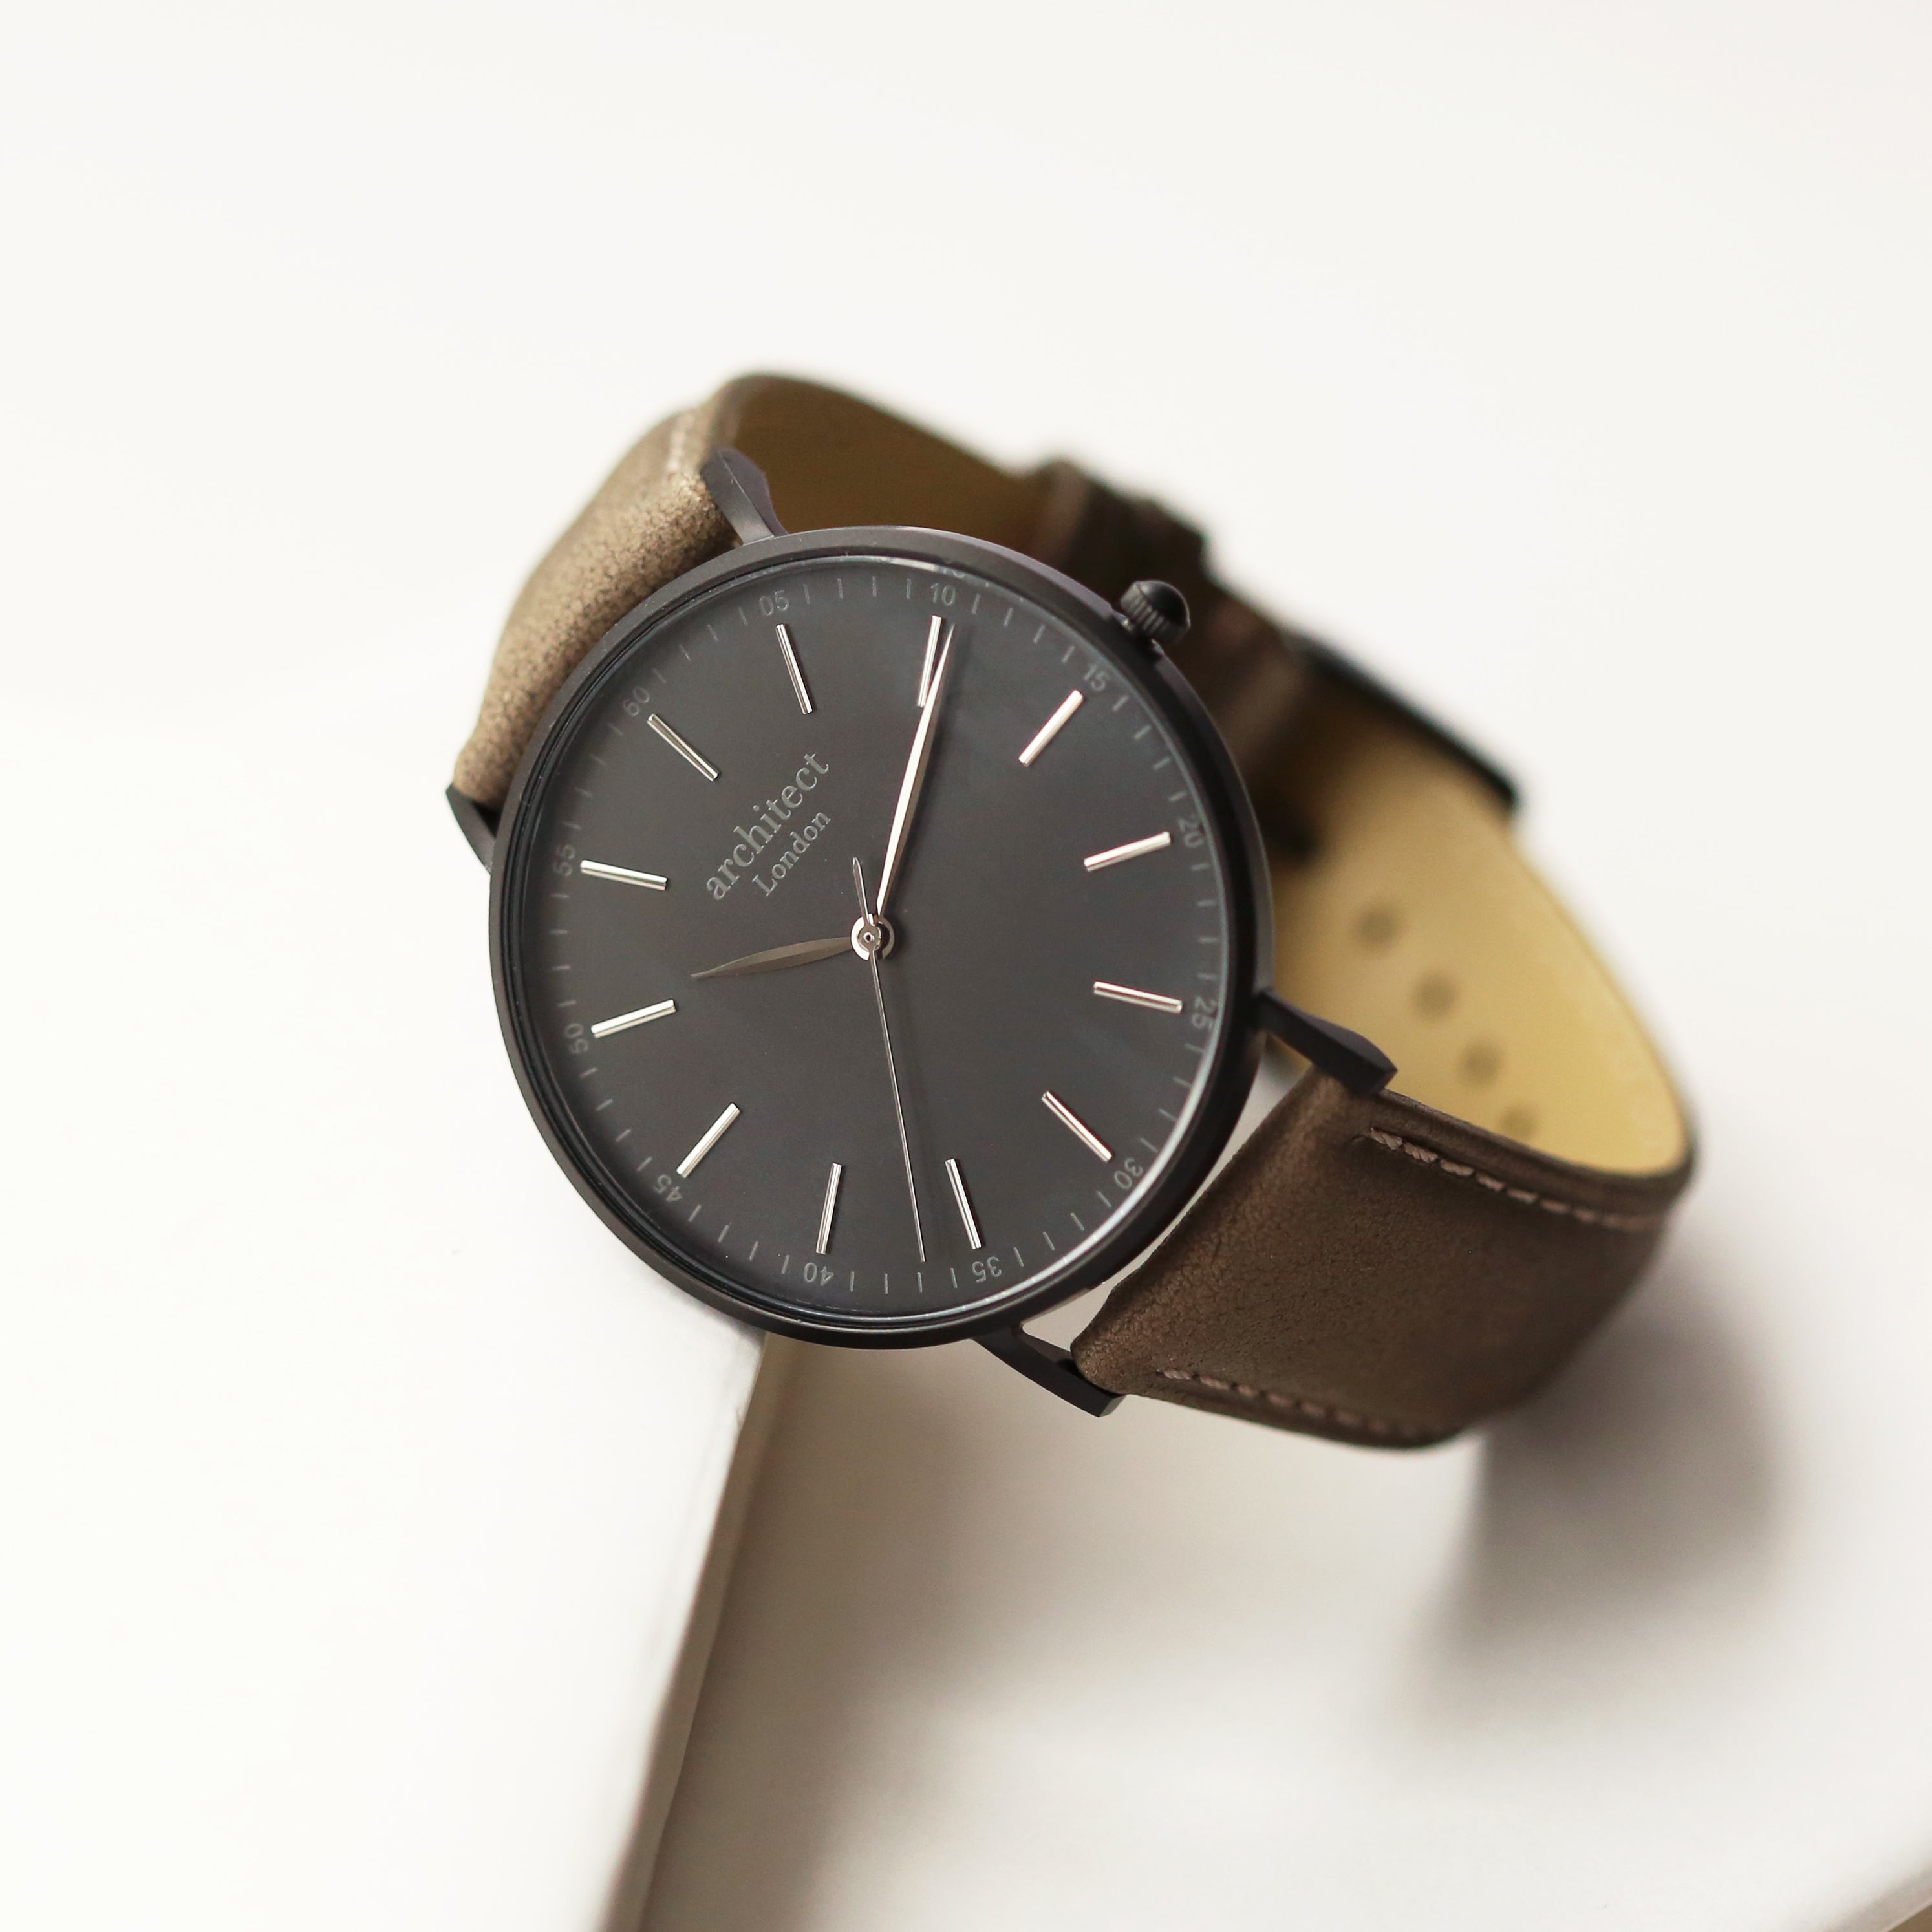 Contactless Payment Watch - Men's Architect Minimalist + Urban Grey Strap + Own Handwriting Engraving